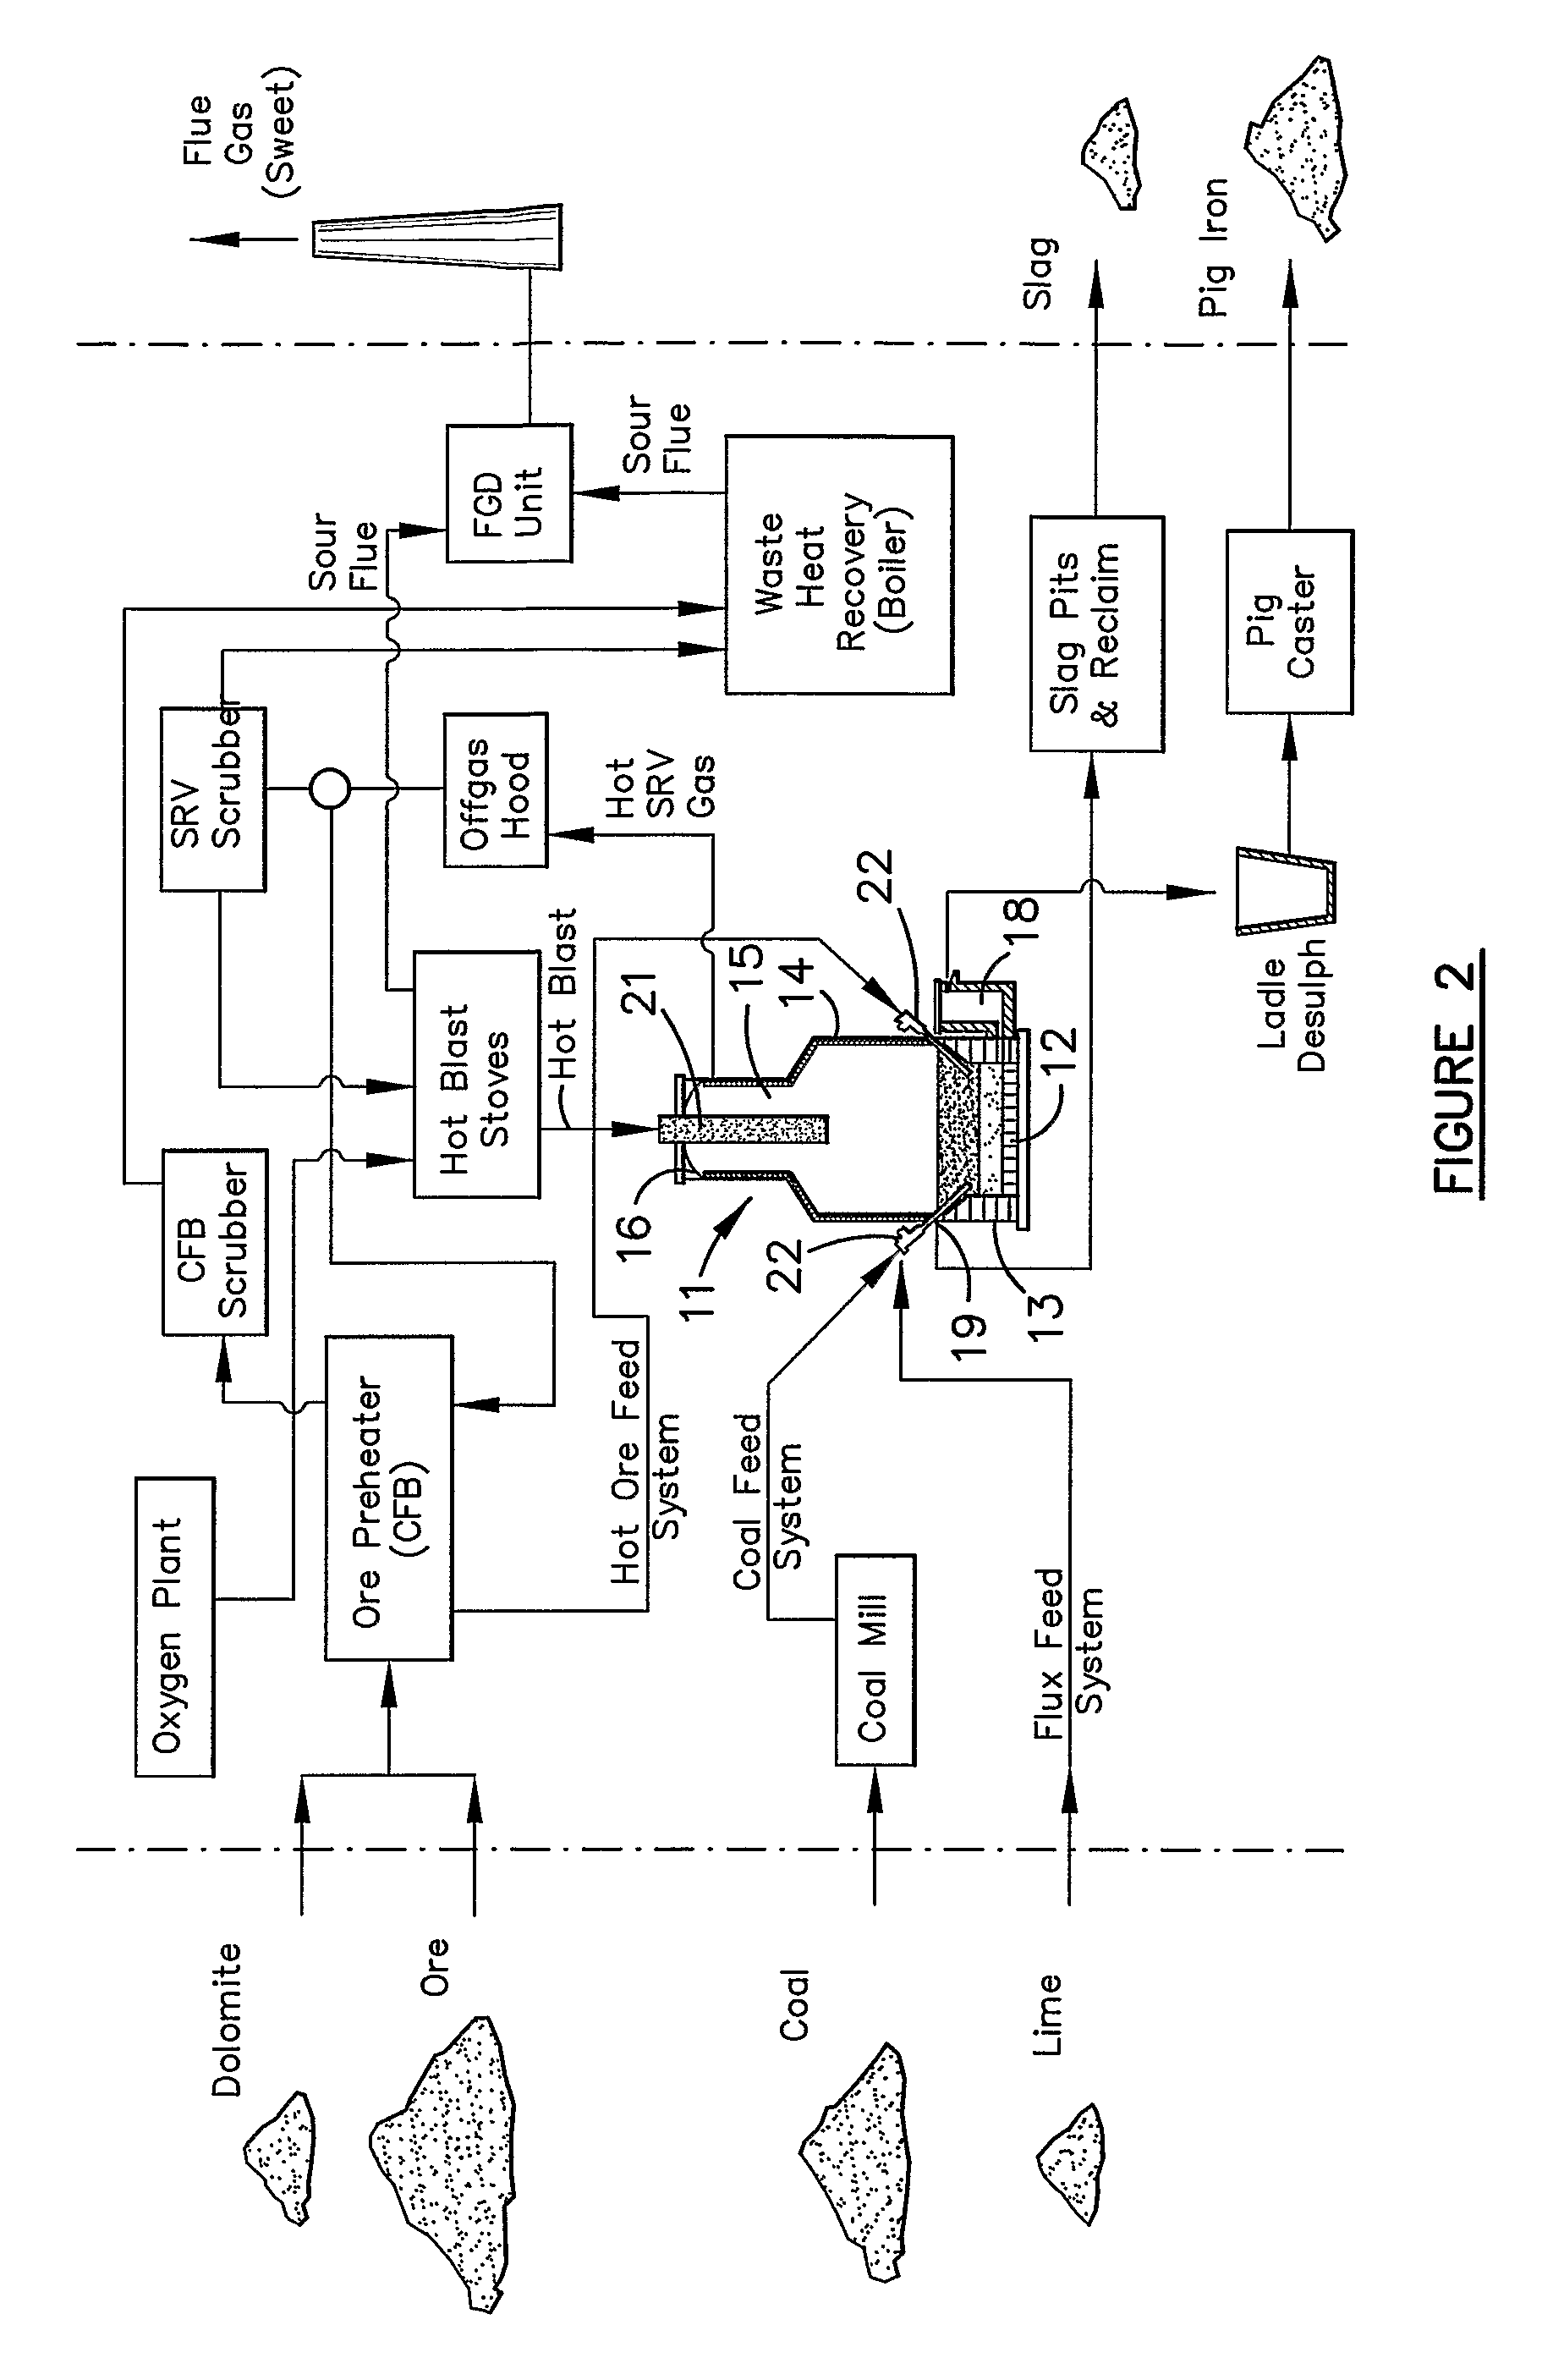 Method of building a direct smelting plant